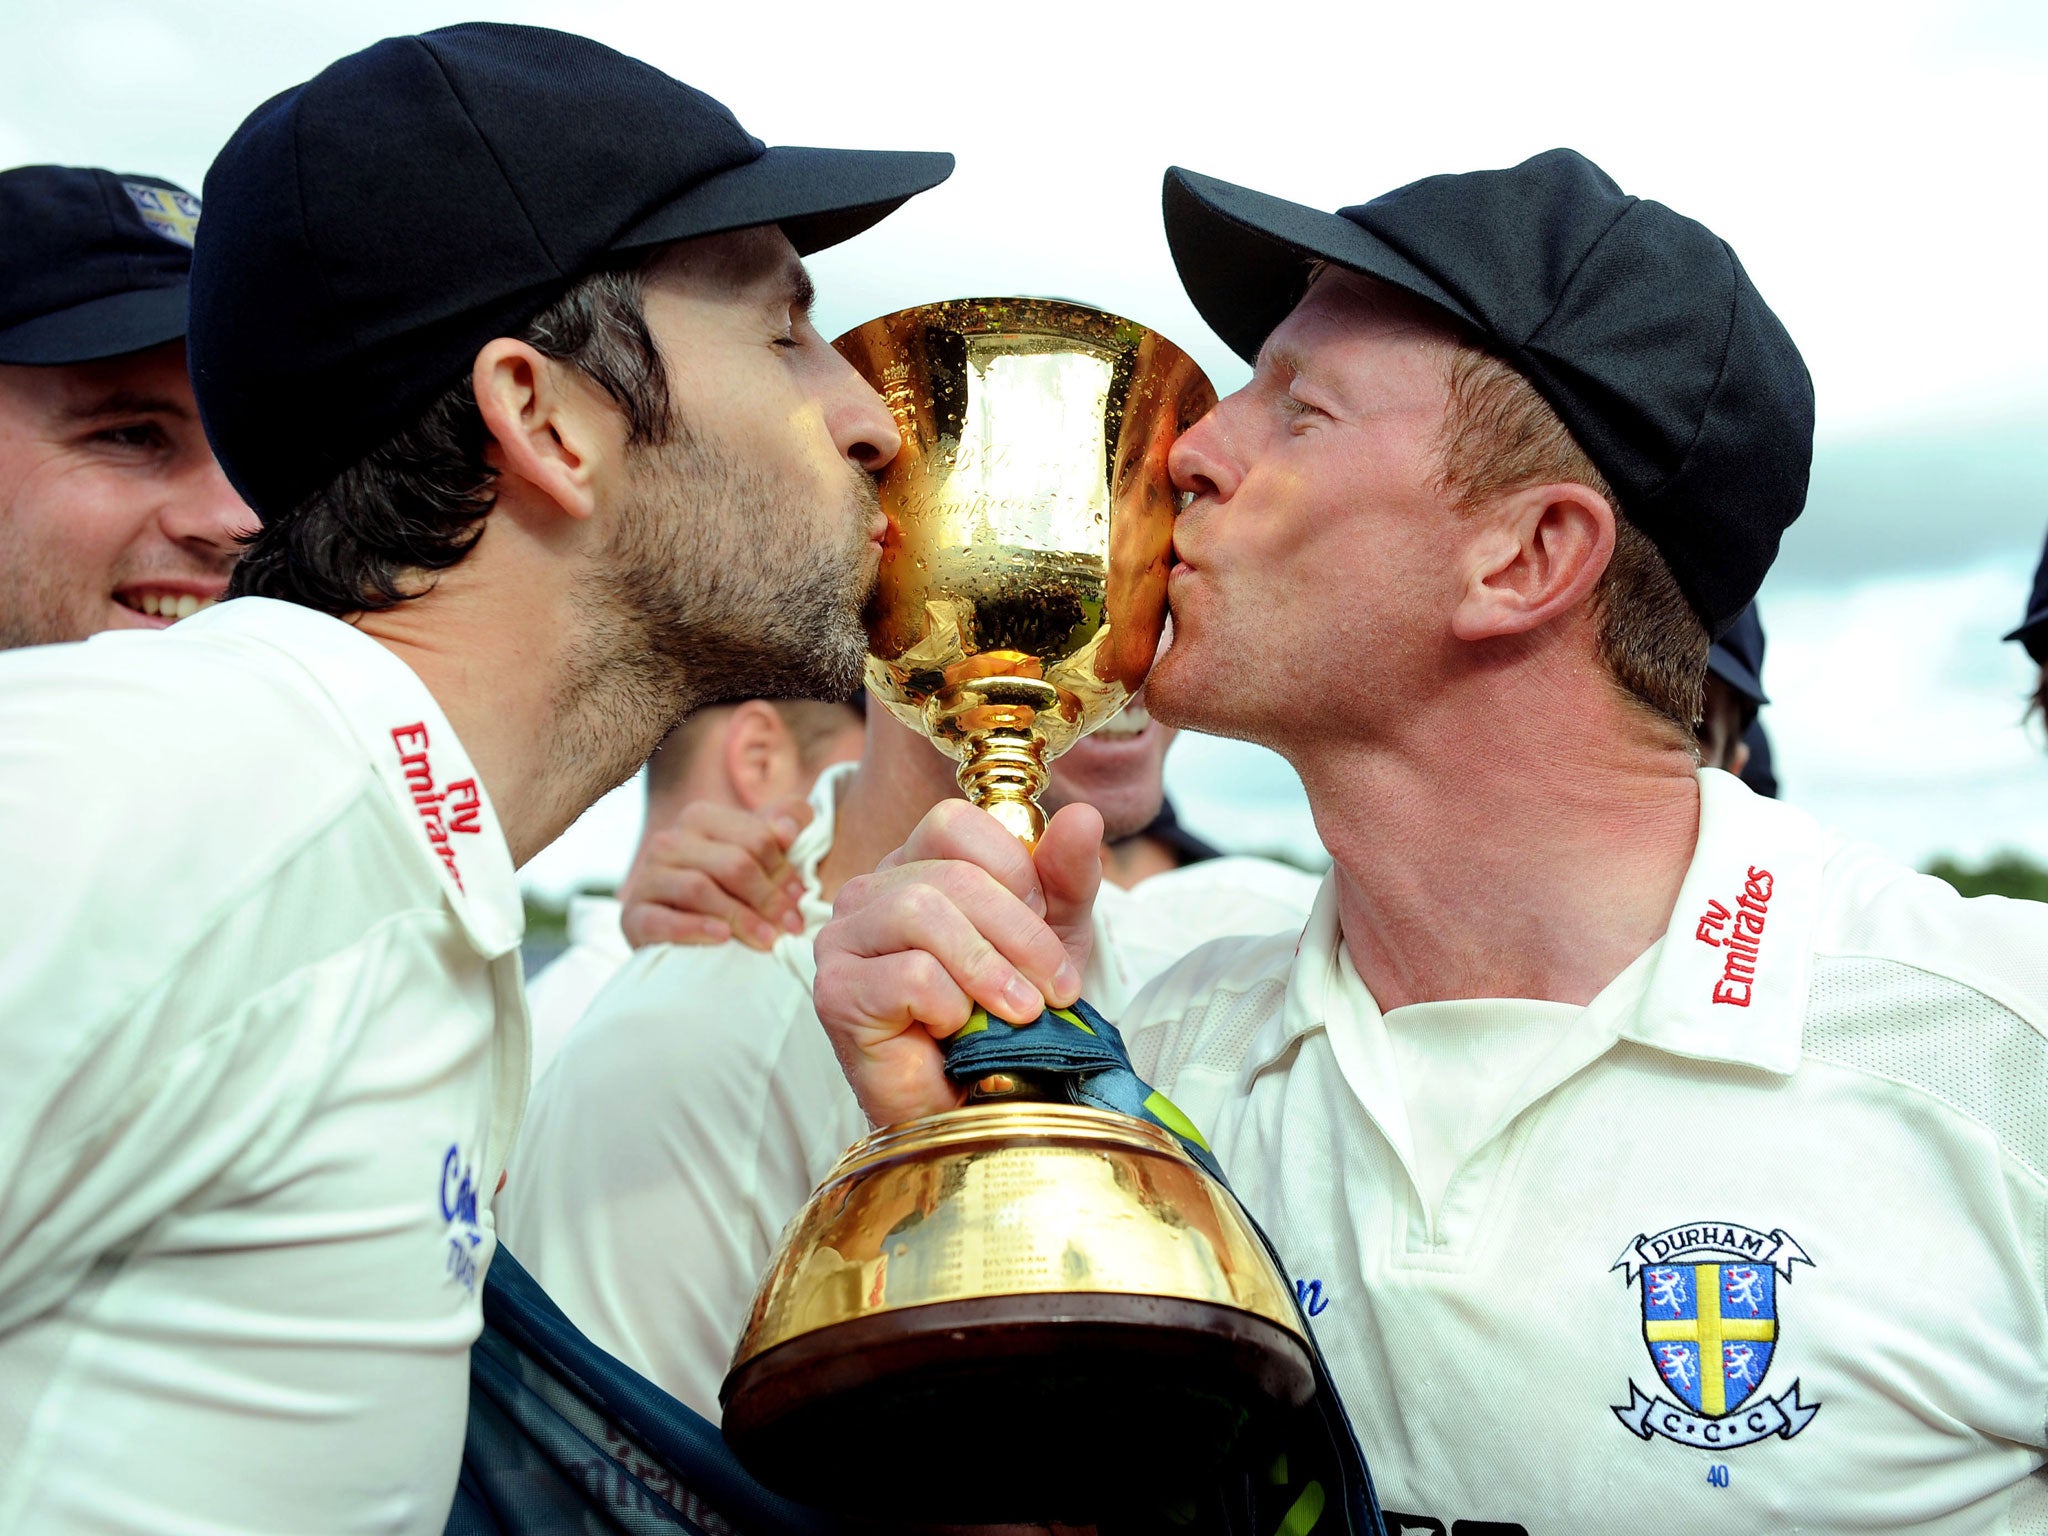 Graham Onions (on the left) with Paul Collingwood after Durham win title